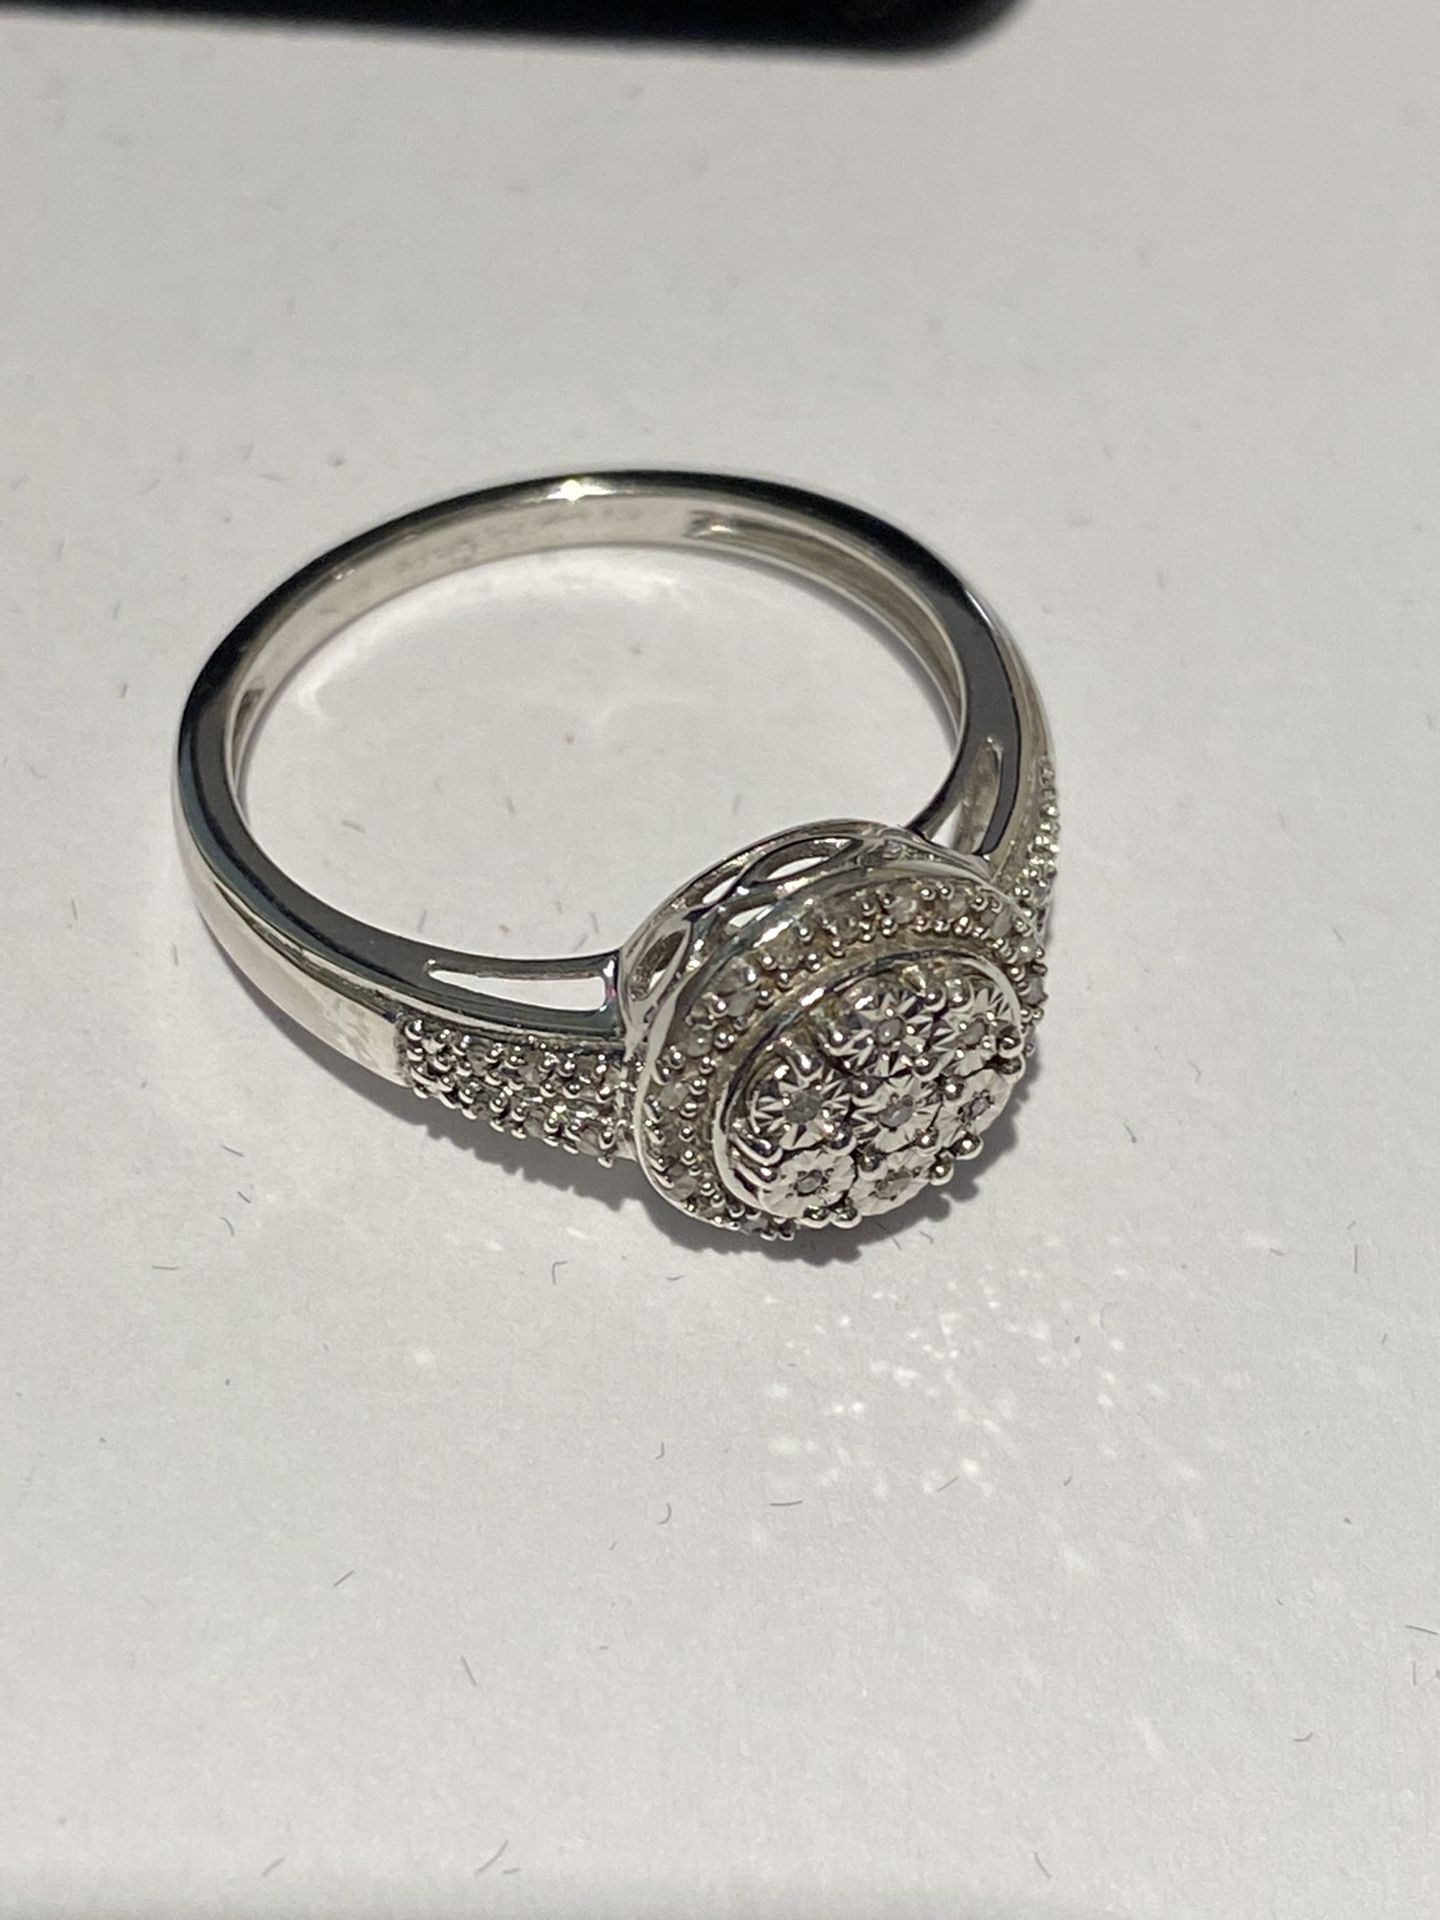 Beautiful Ladies Silver Ring with Real Diamonds Size 7.25